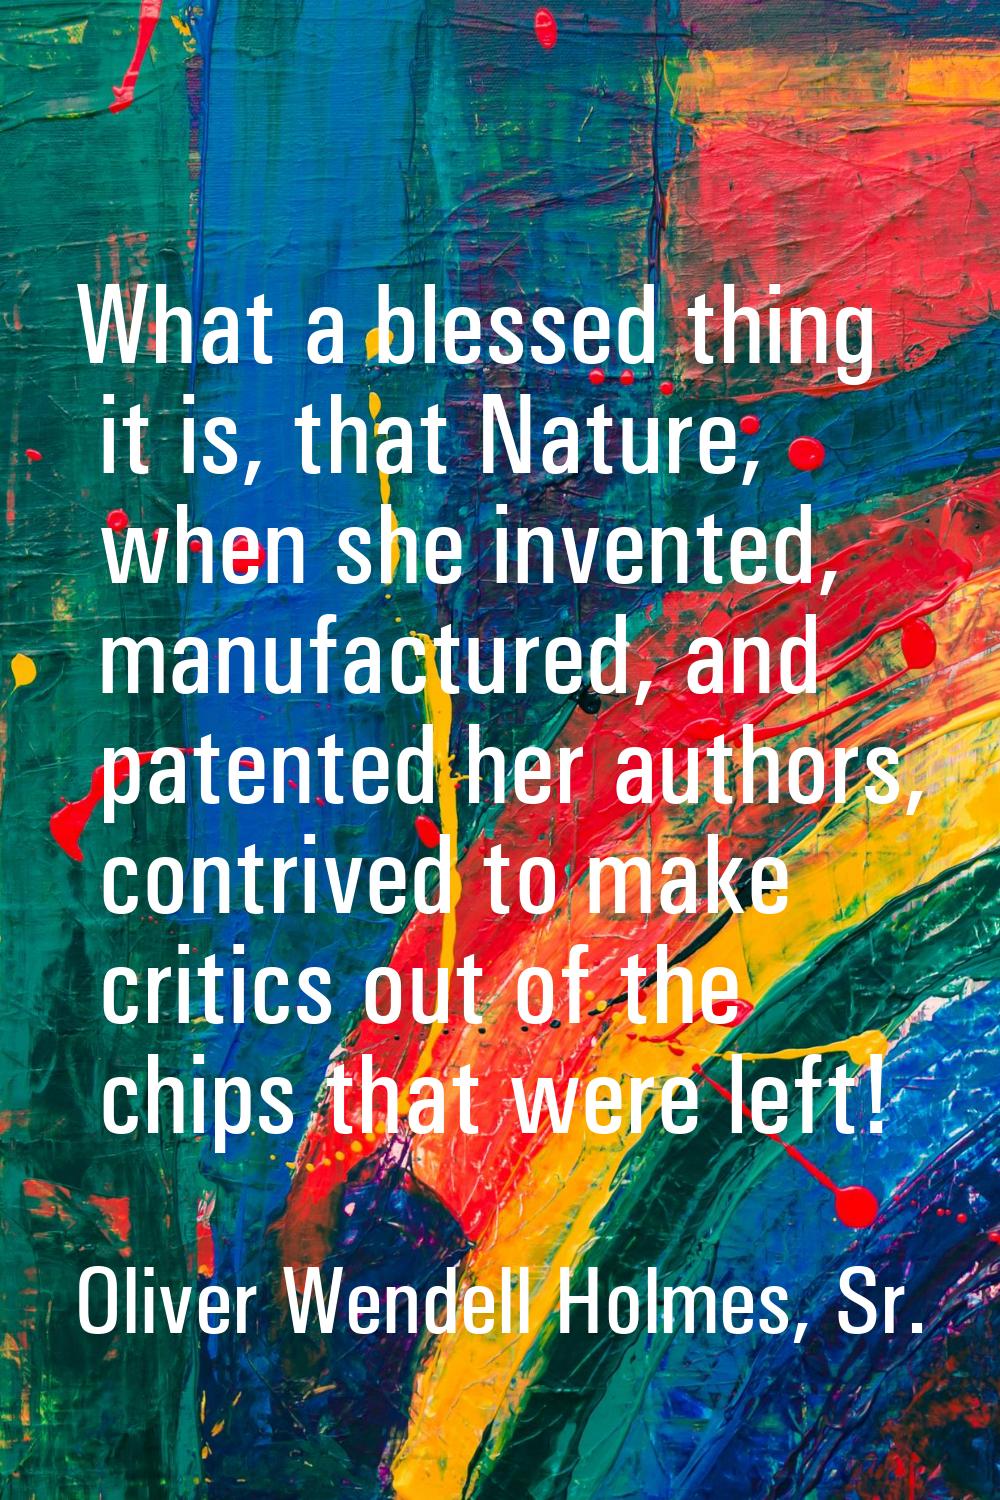 What a blessed thing it is, that Nature, when she invented, manufactured, and patented her authors,